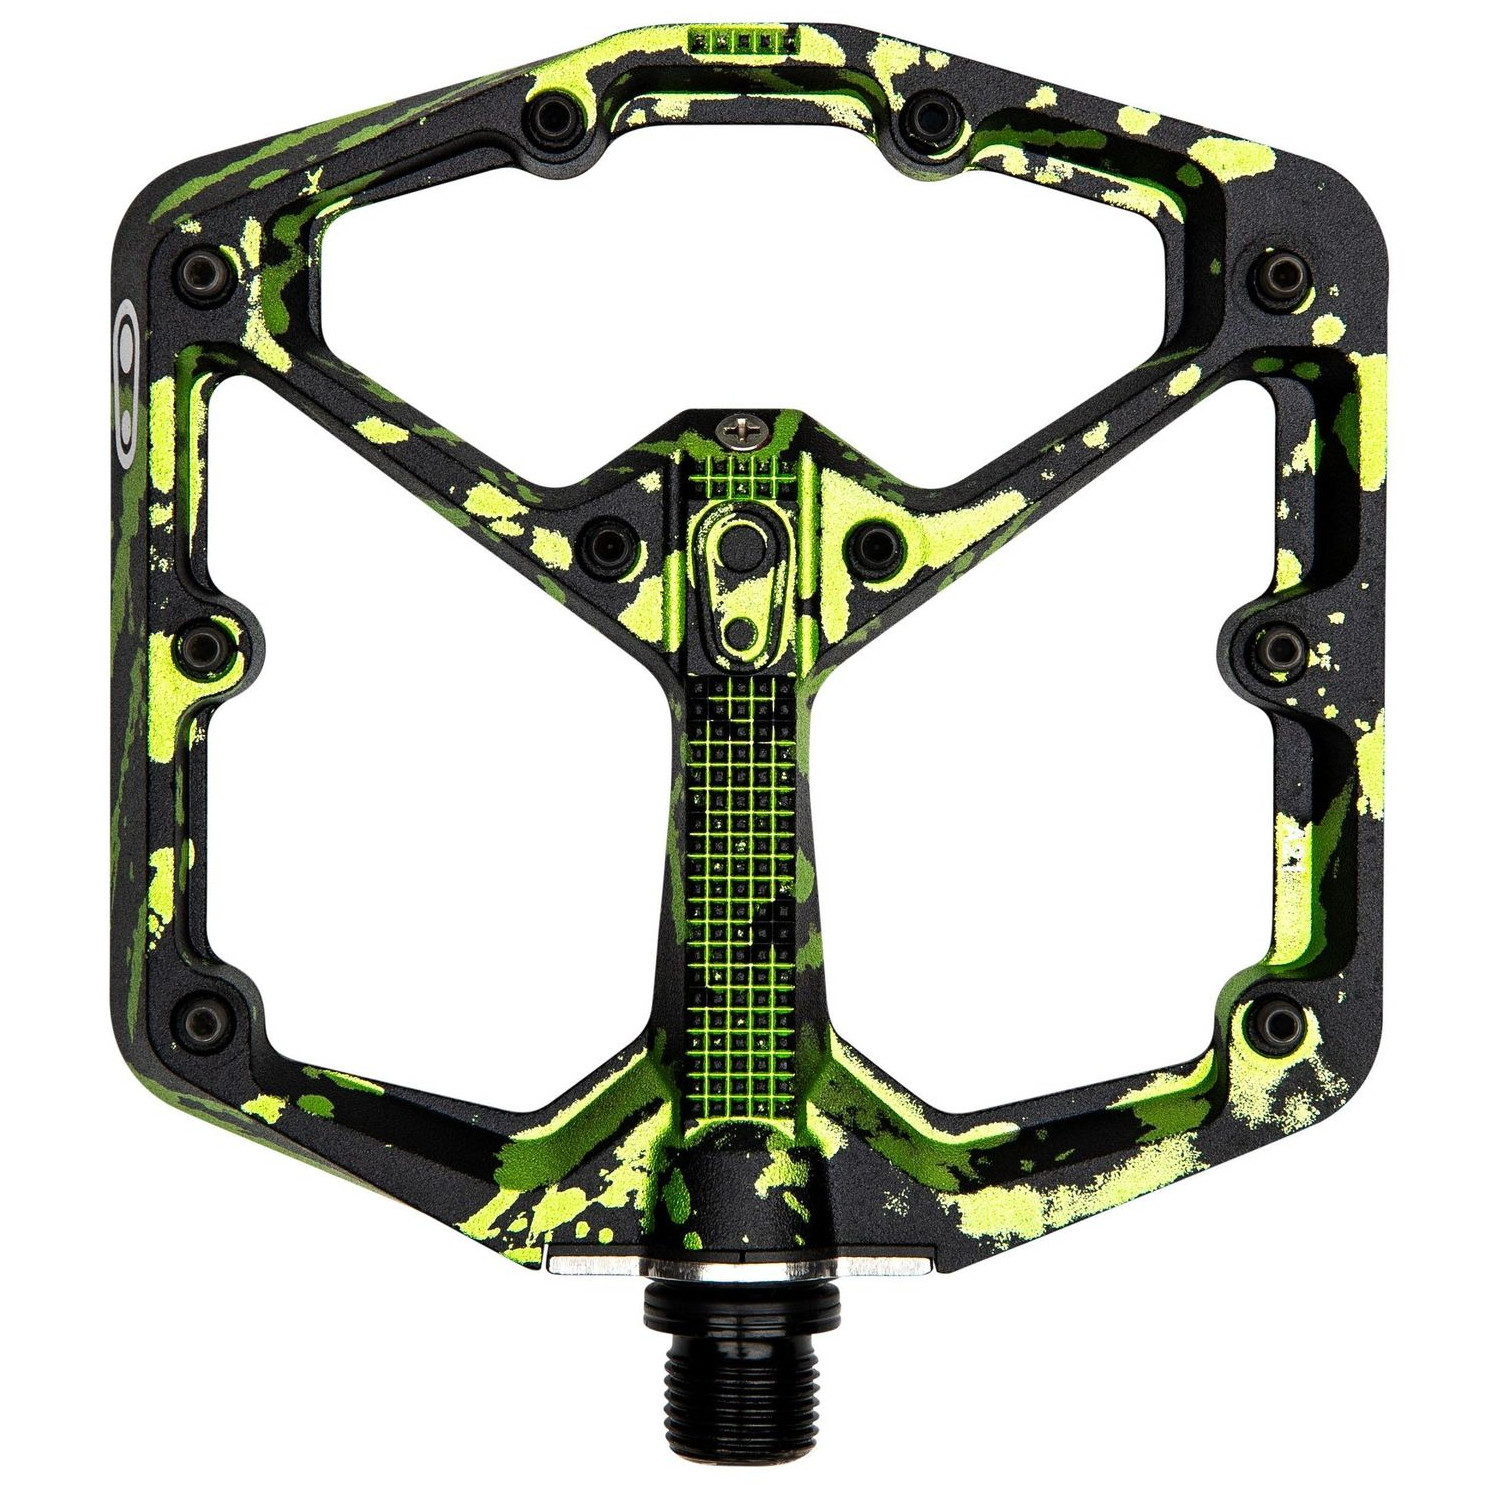 Picture of Crankbrothers Stamp 7 Large Flat Pedals - Splatter Limited Edition - black/lime green